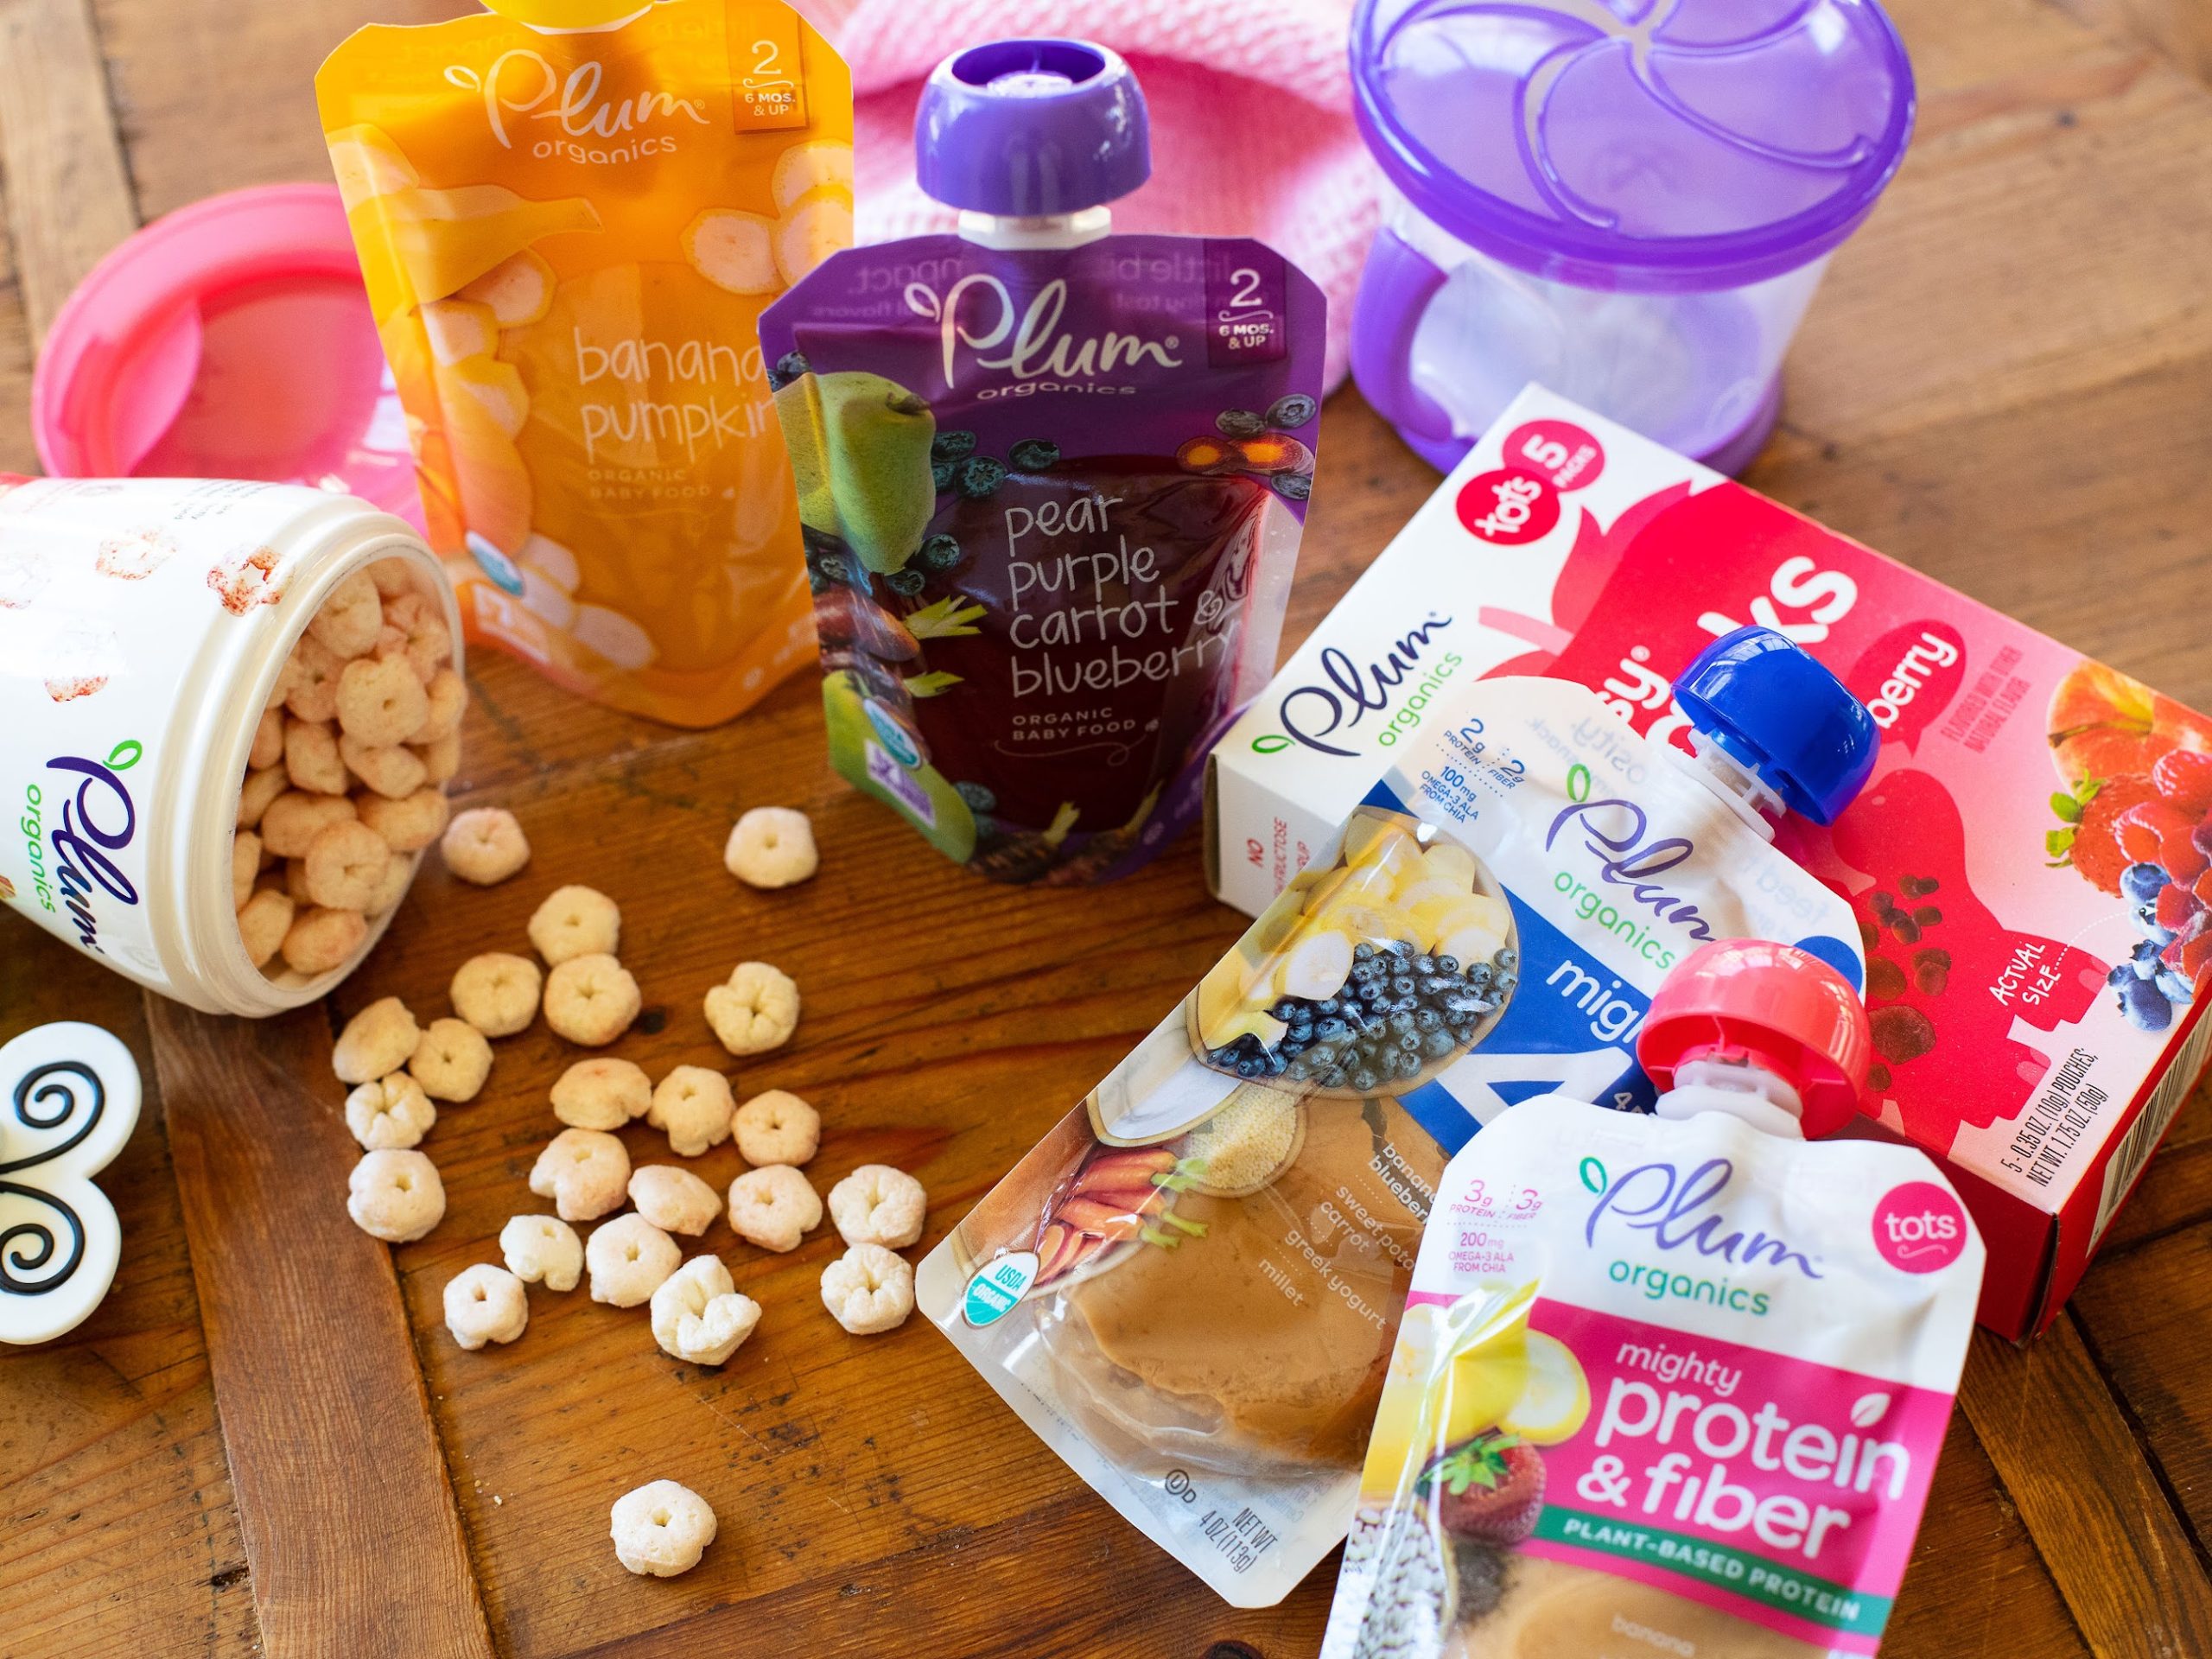 Fantastic Deal On Plum Organics® Baby Foods - Buy One Get One Free At Publix! on I Heart Publix